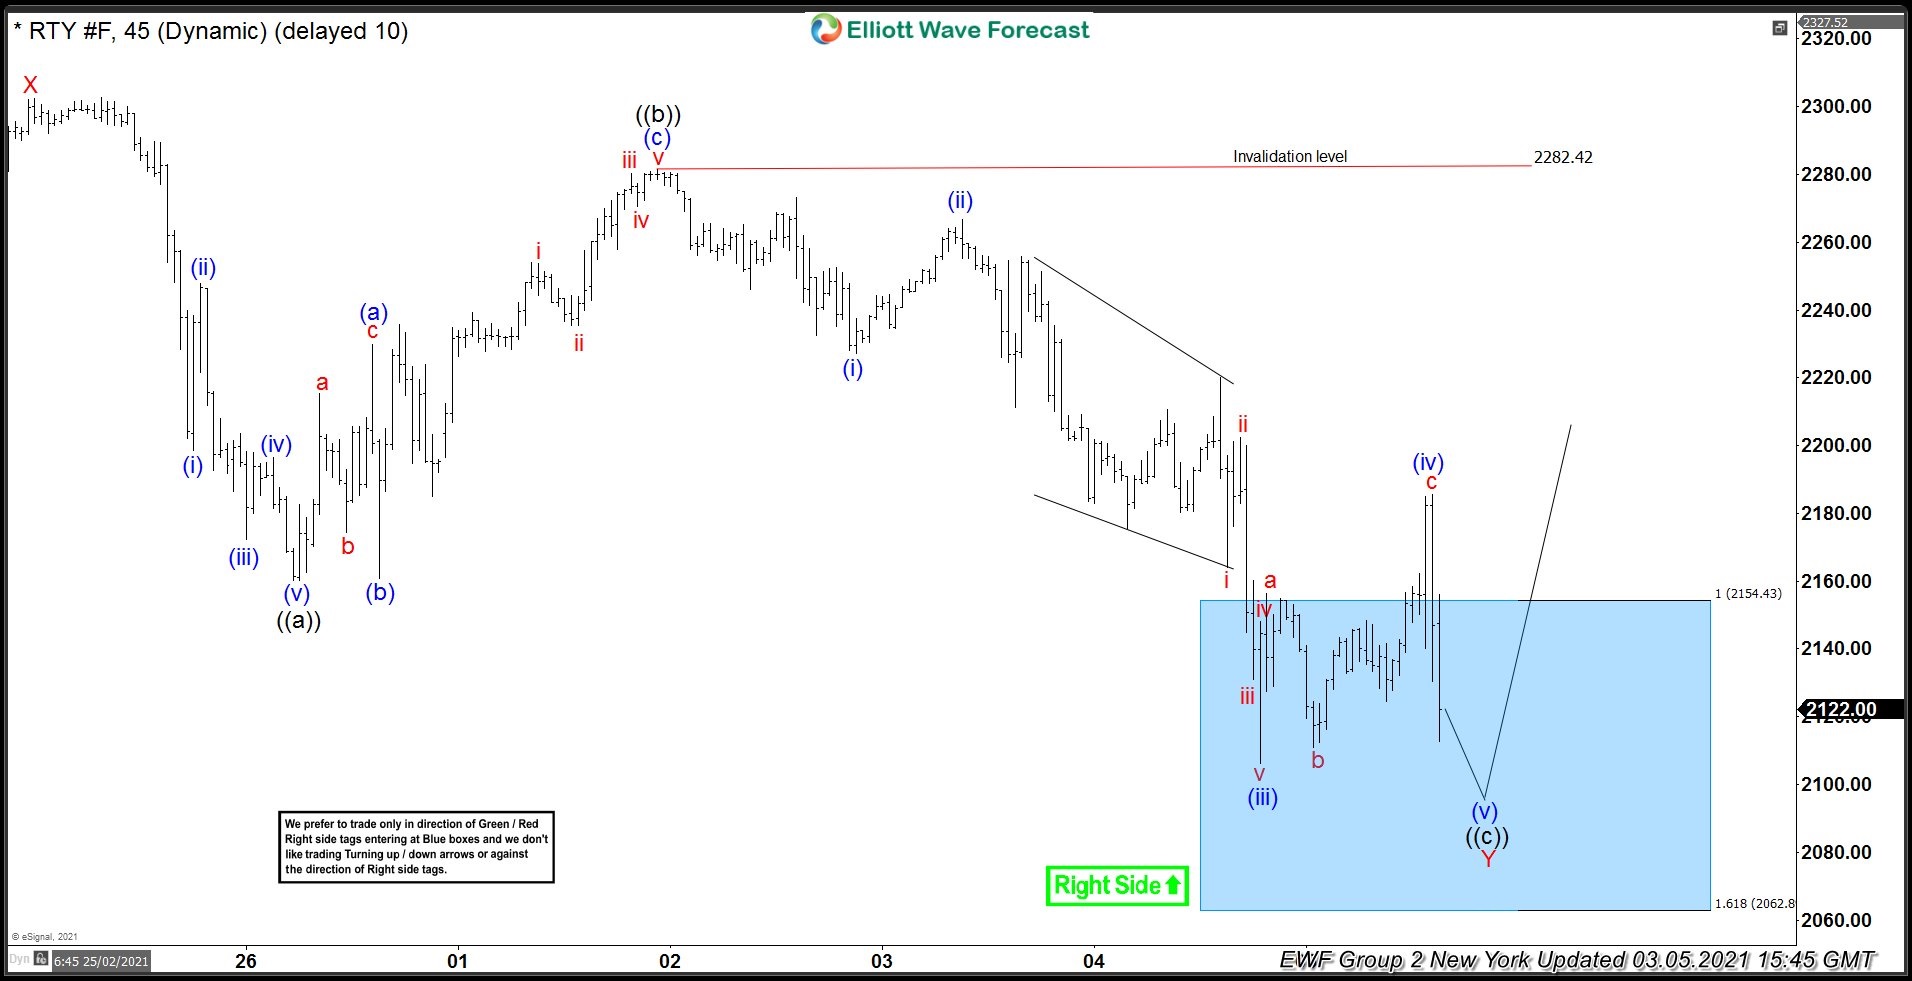 Russell Finds Bulls At The Blue Box And Reacts Higher